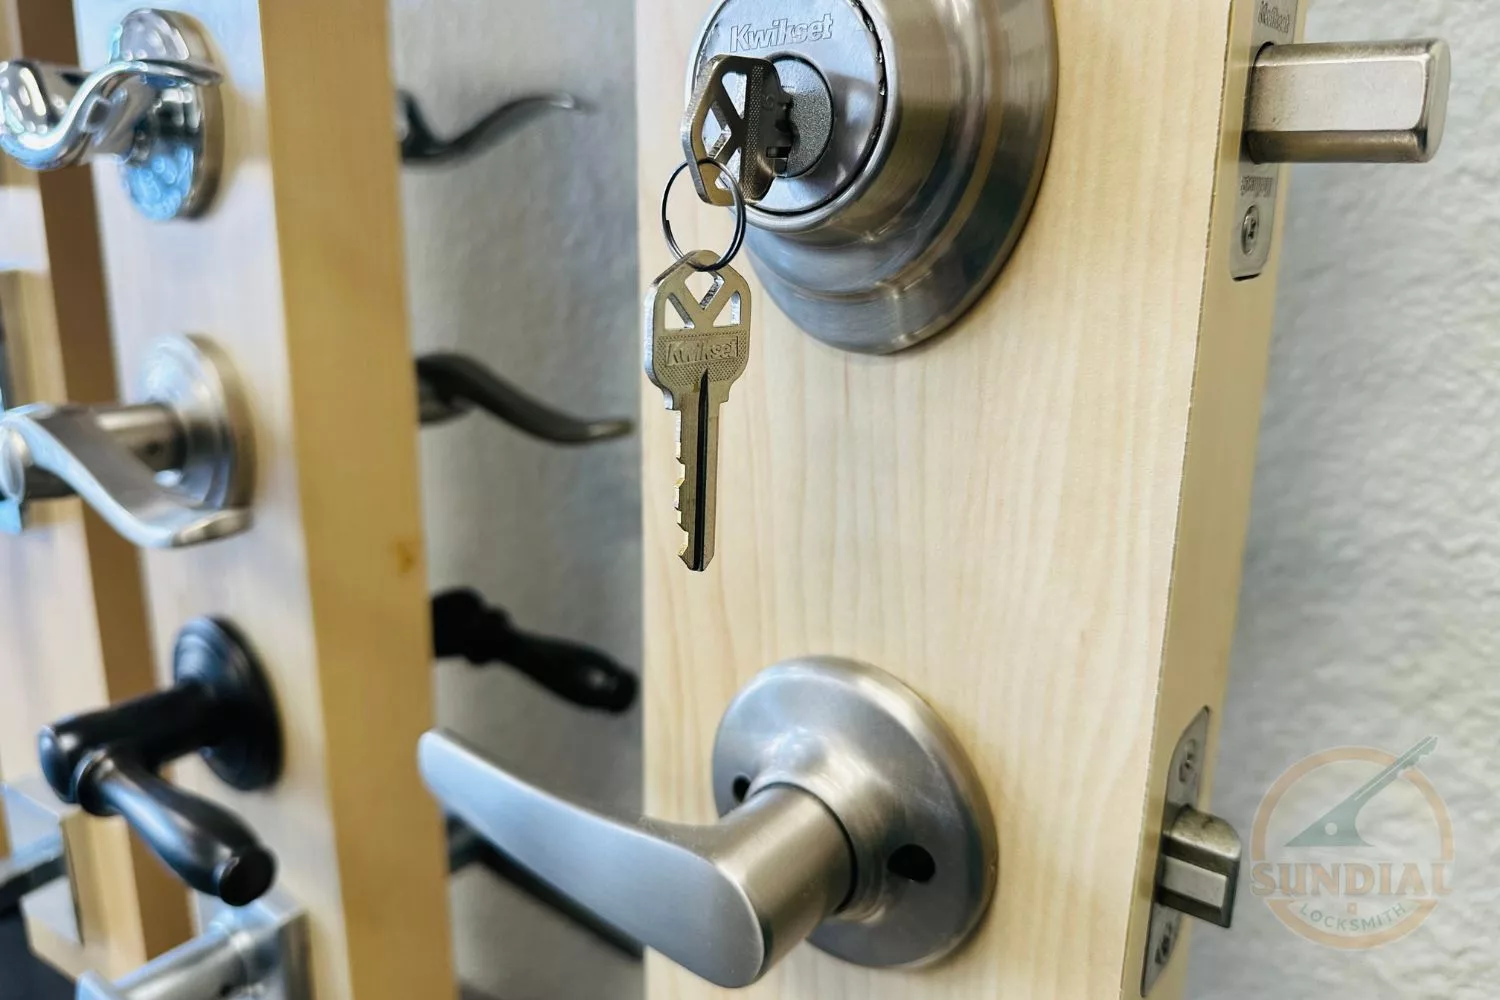 Close-up view of a door handle and keyhole with a 'Kwikset' key inserted, surrounded by various door handles and hardware, with the 'Sundial Locksmith' logo watermark.